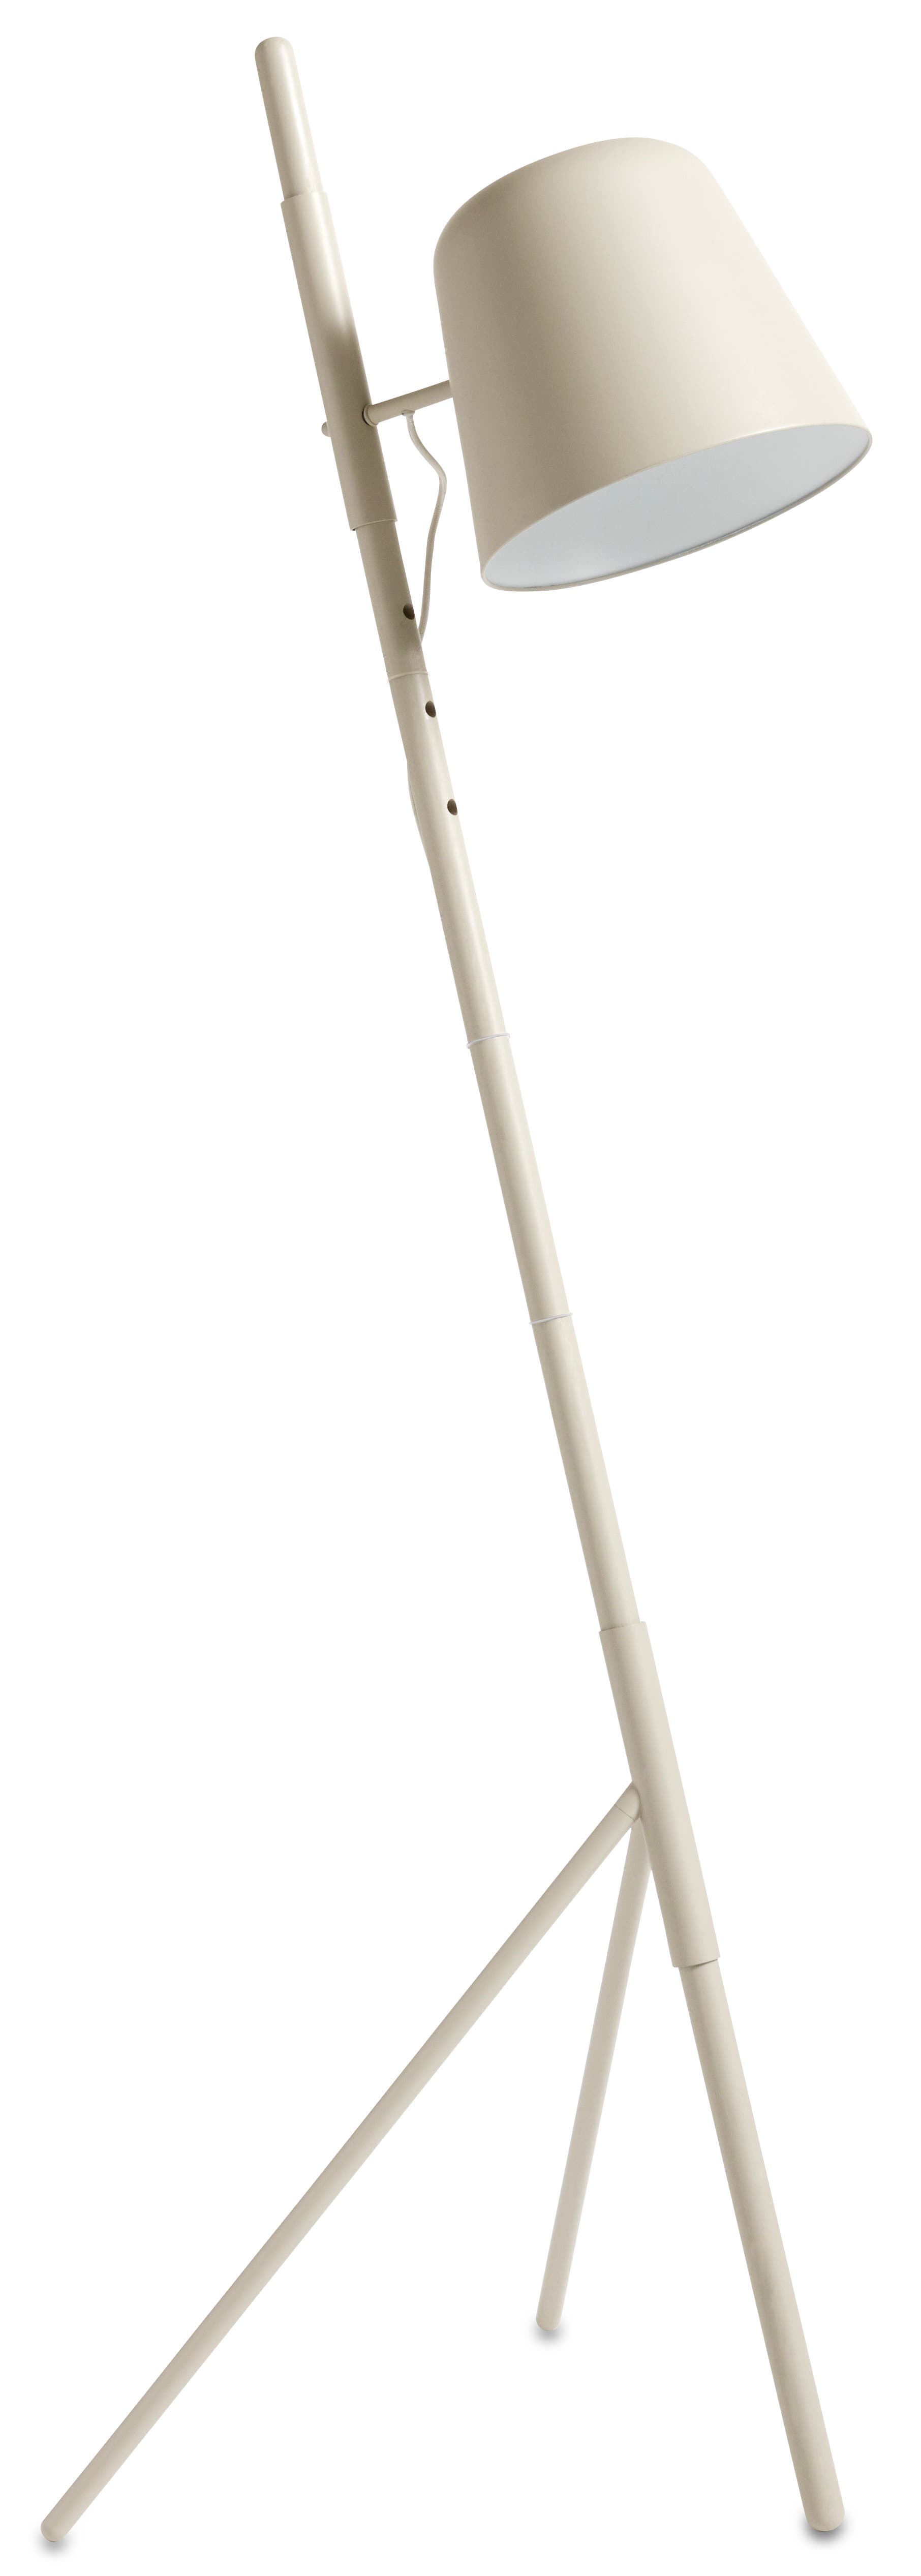 Outrigger floor lamp